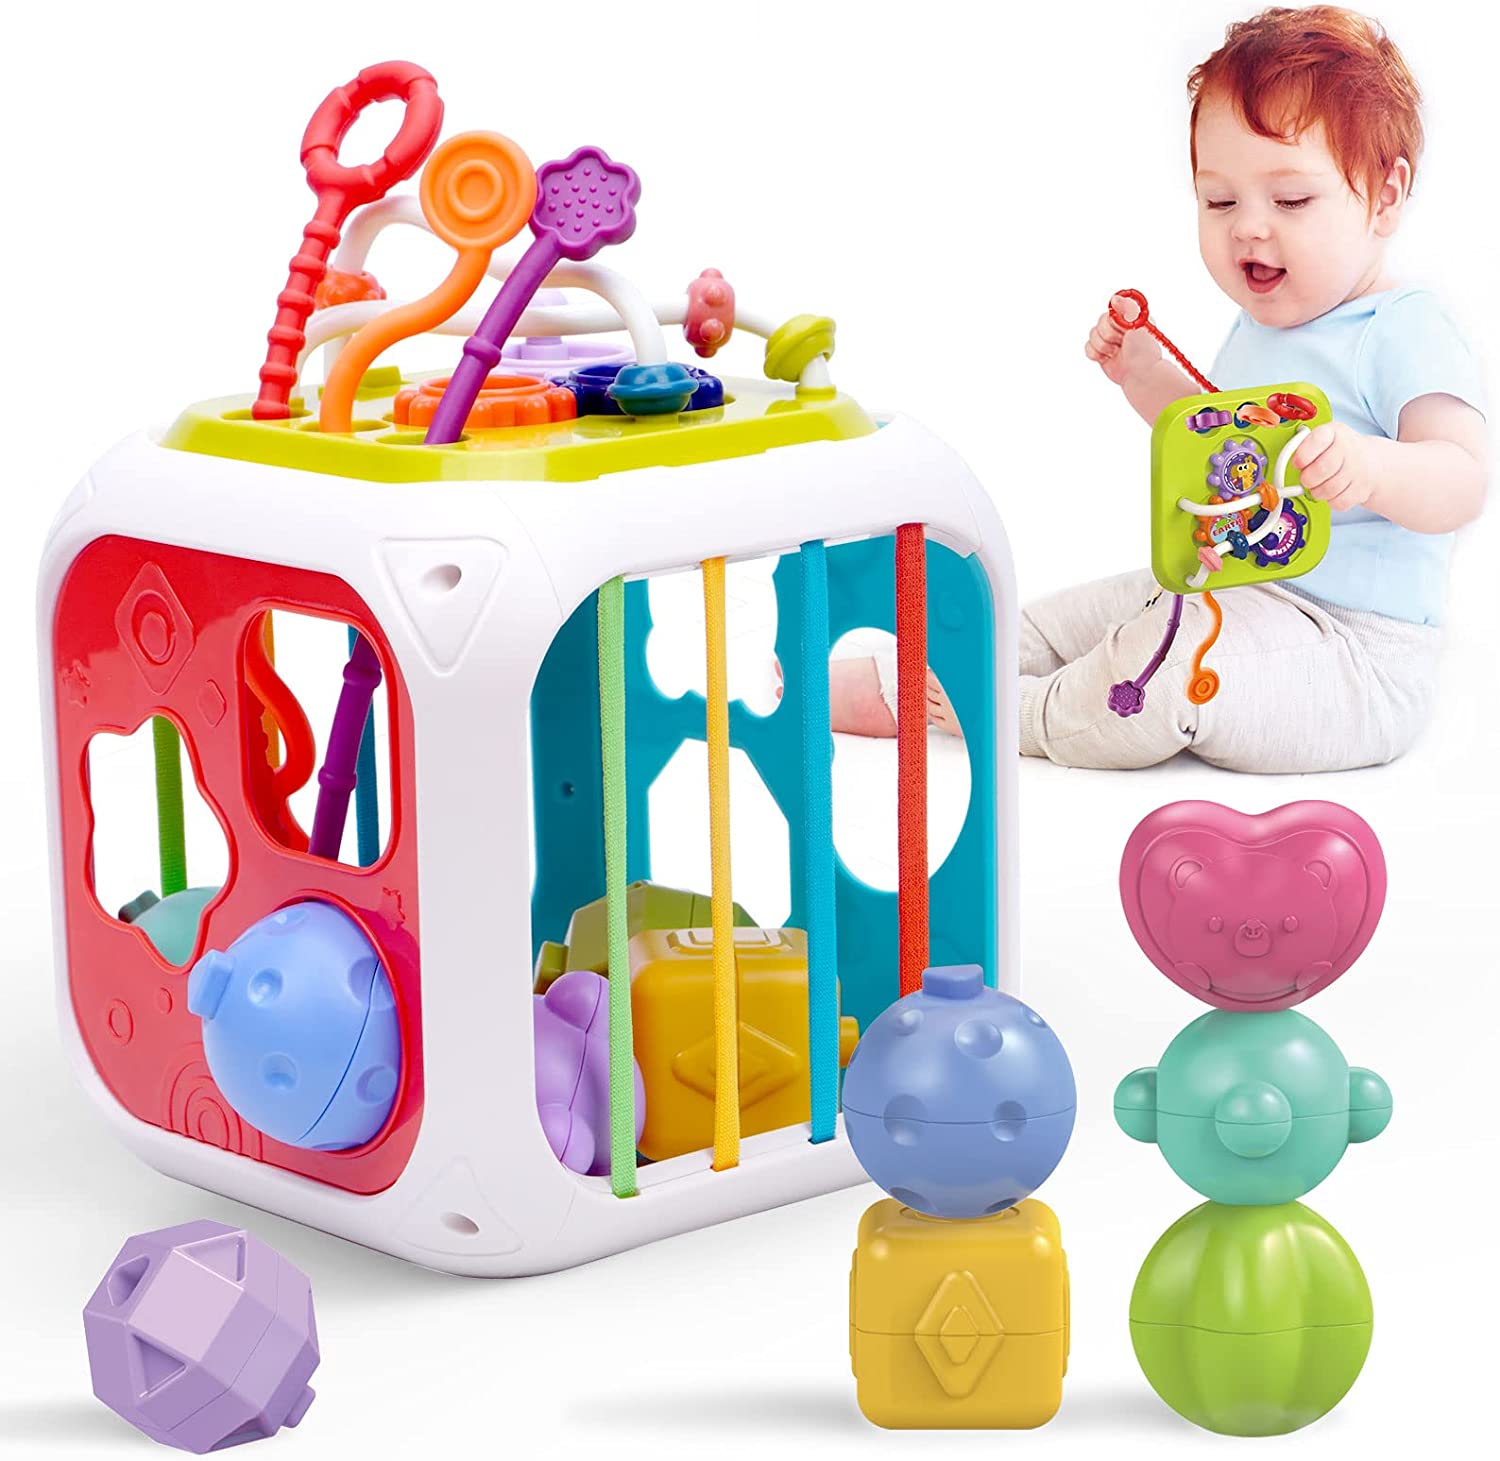 Image of Baby Developmental Toys: Engage, Learn & Play. Limited-time Sale on Early Childhood Collection at OleOle. Shop Now for Quality Baby Playtime Essentials